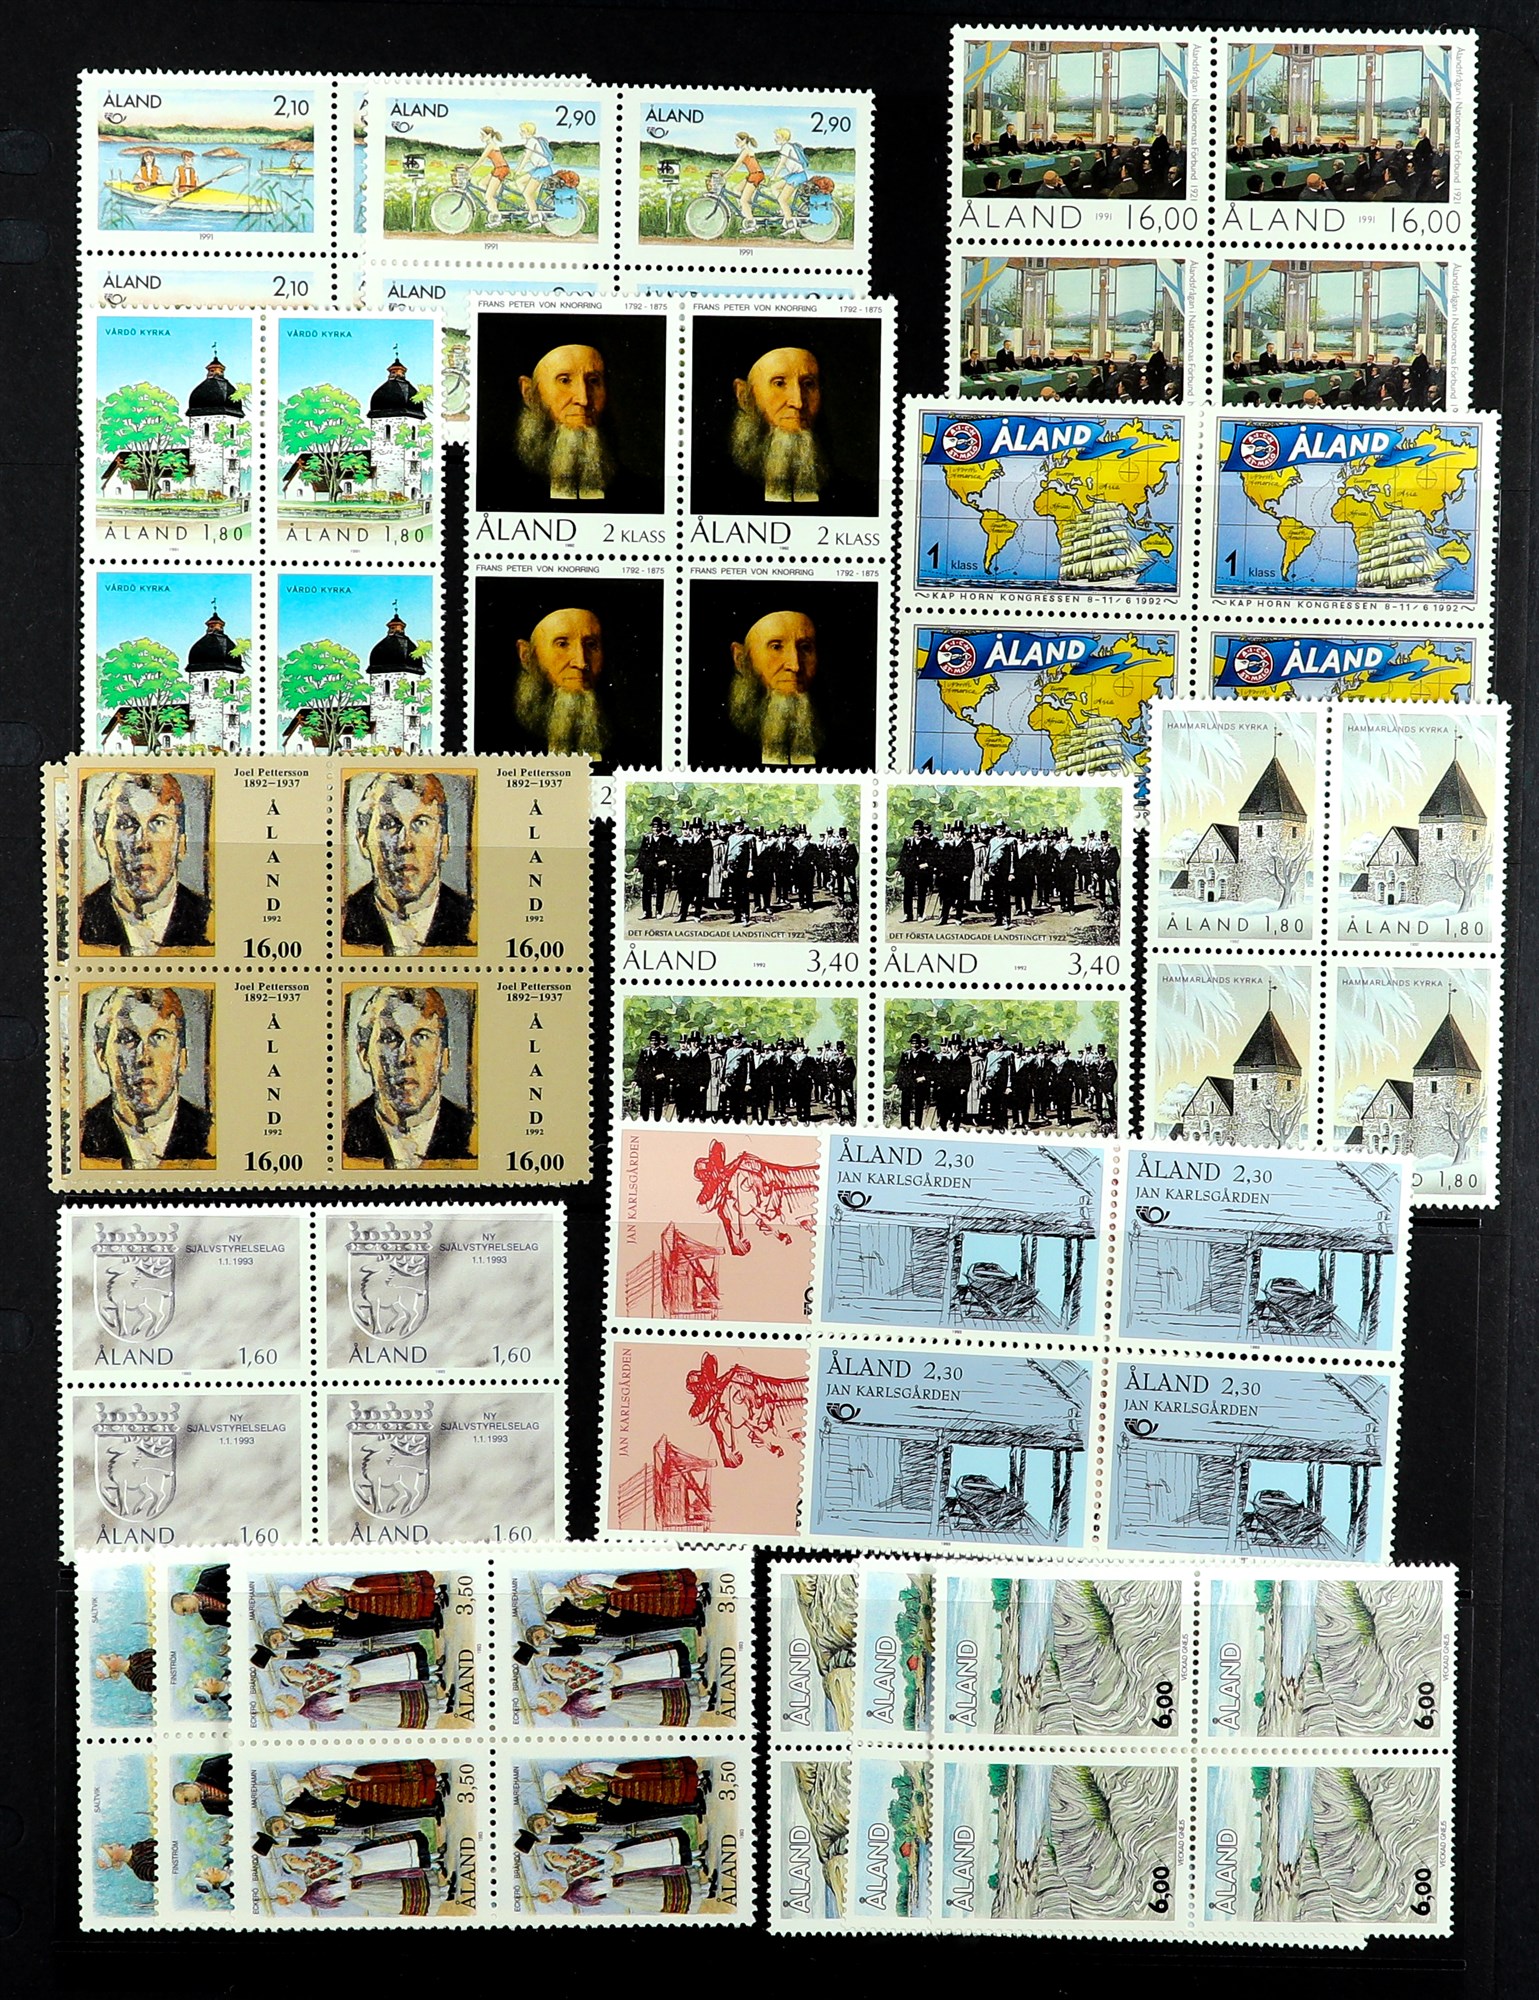 ALAND ISLANDS 1984 - 2001 COLLECTION complete for the period in never hinged mint blocks 4, also all - Image 3 of 12